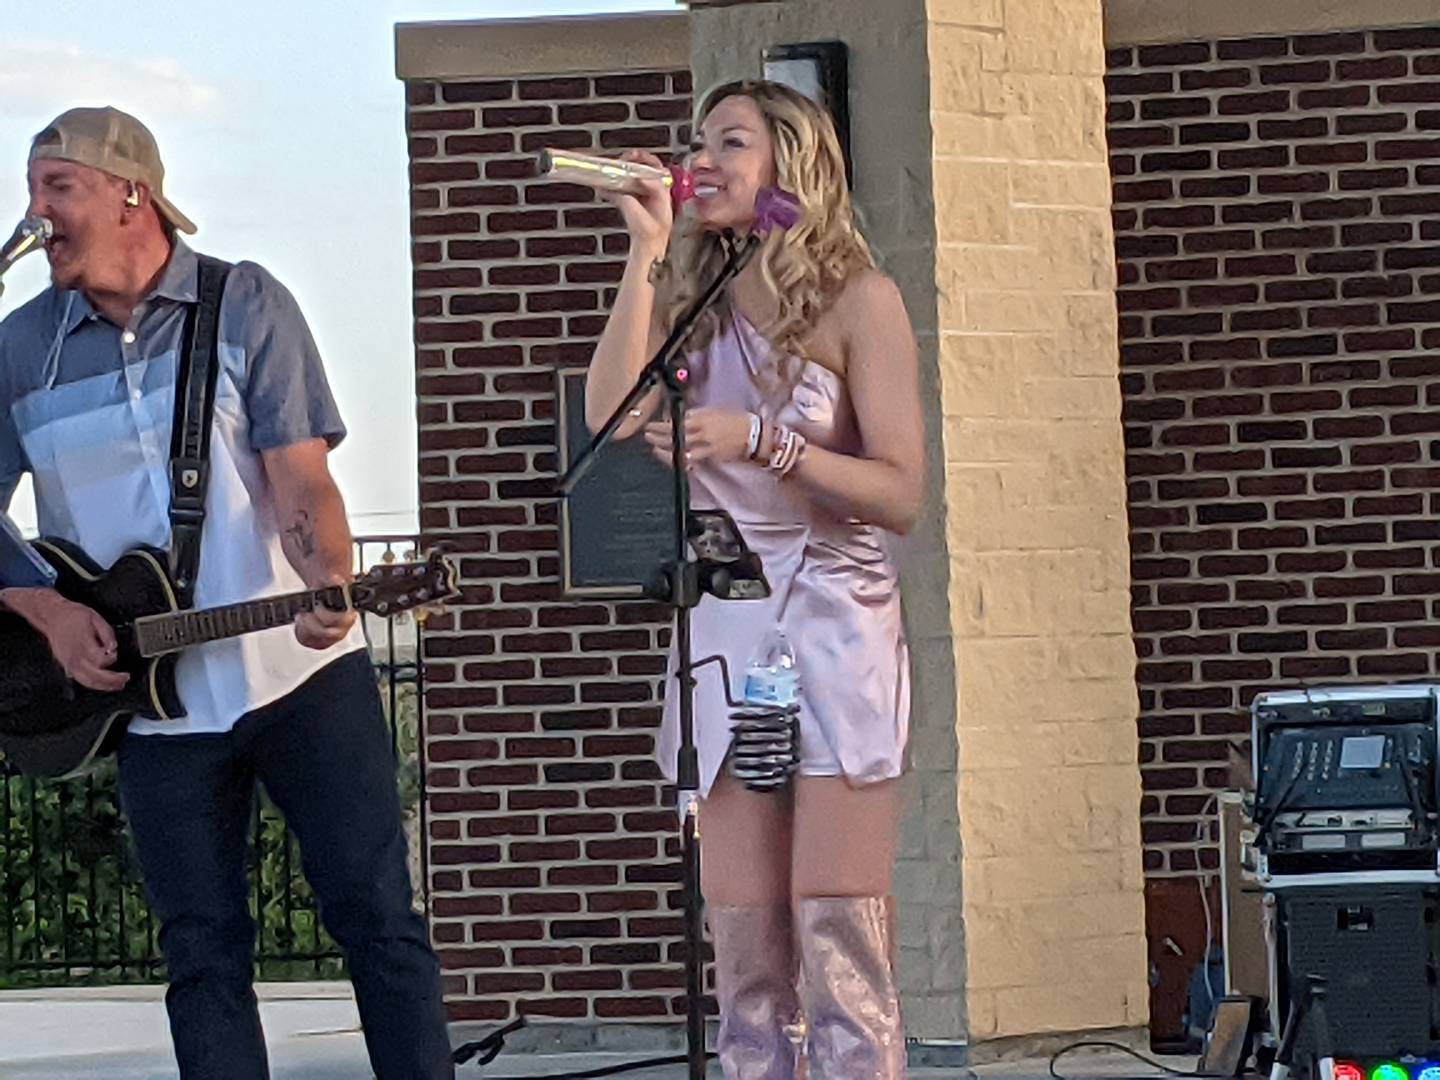 Joliet native Sammy Jo performed in front of a record crowd June 6 at Venue 1012 in Oswego.